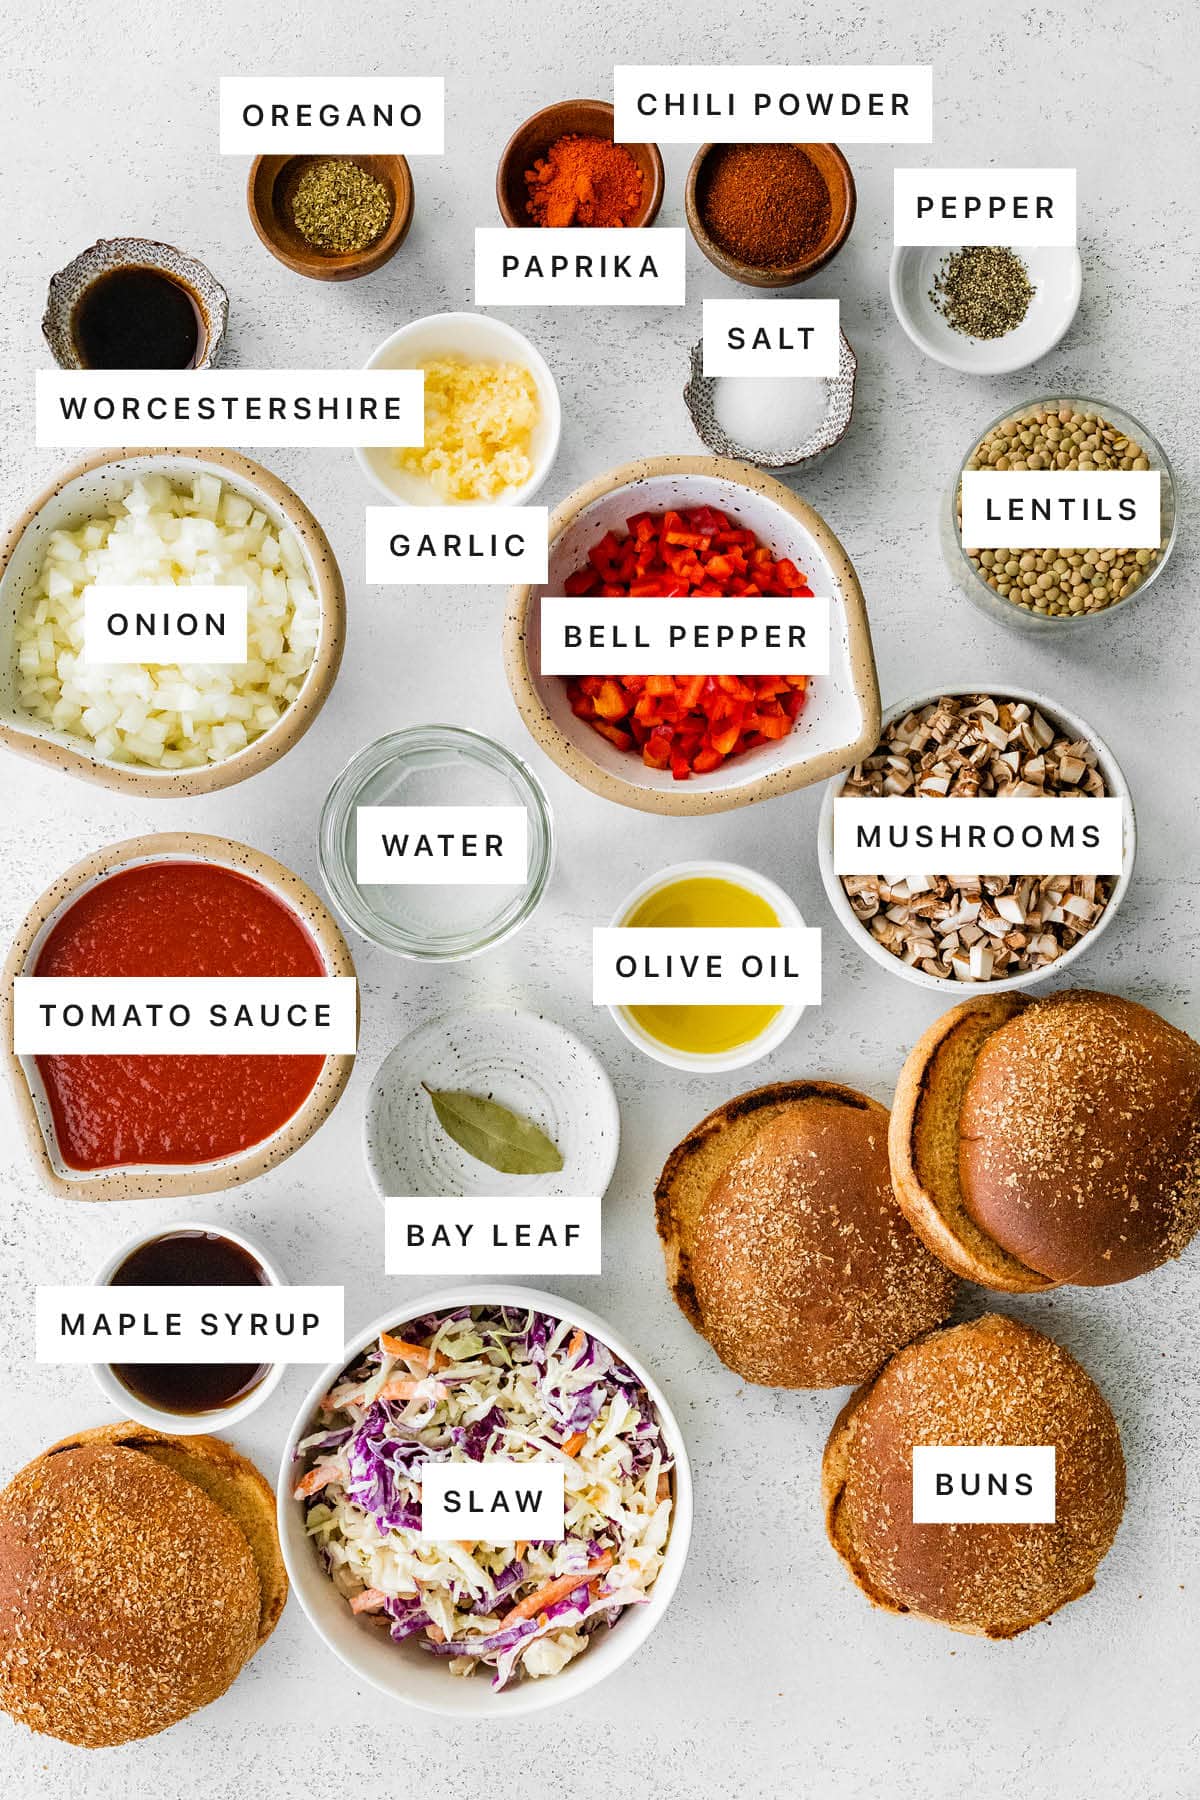 Ingredients measured out to make Vegan Sloppy Joes: oregano, paprika, chili powder, pepper, salt, Worcestershire, garlic, bell pepper, lentils, onion, water, olive oil, mushrooms, tomato sauce, bay leaf, maple syrup, slaw and buns.